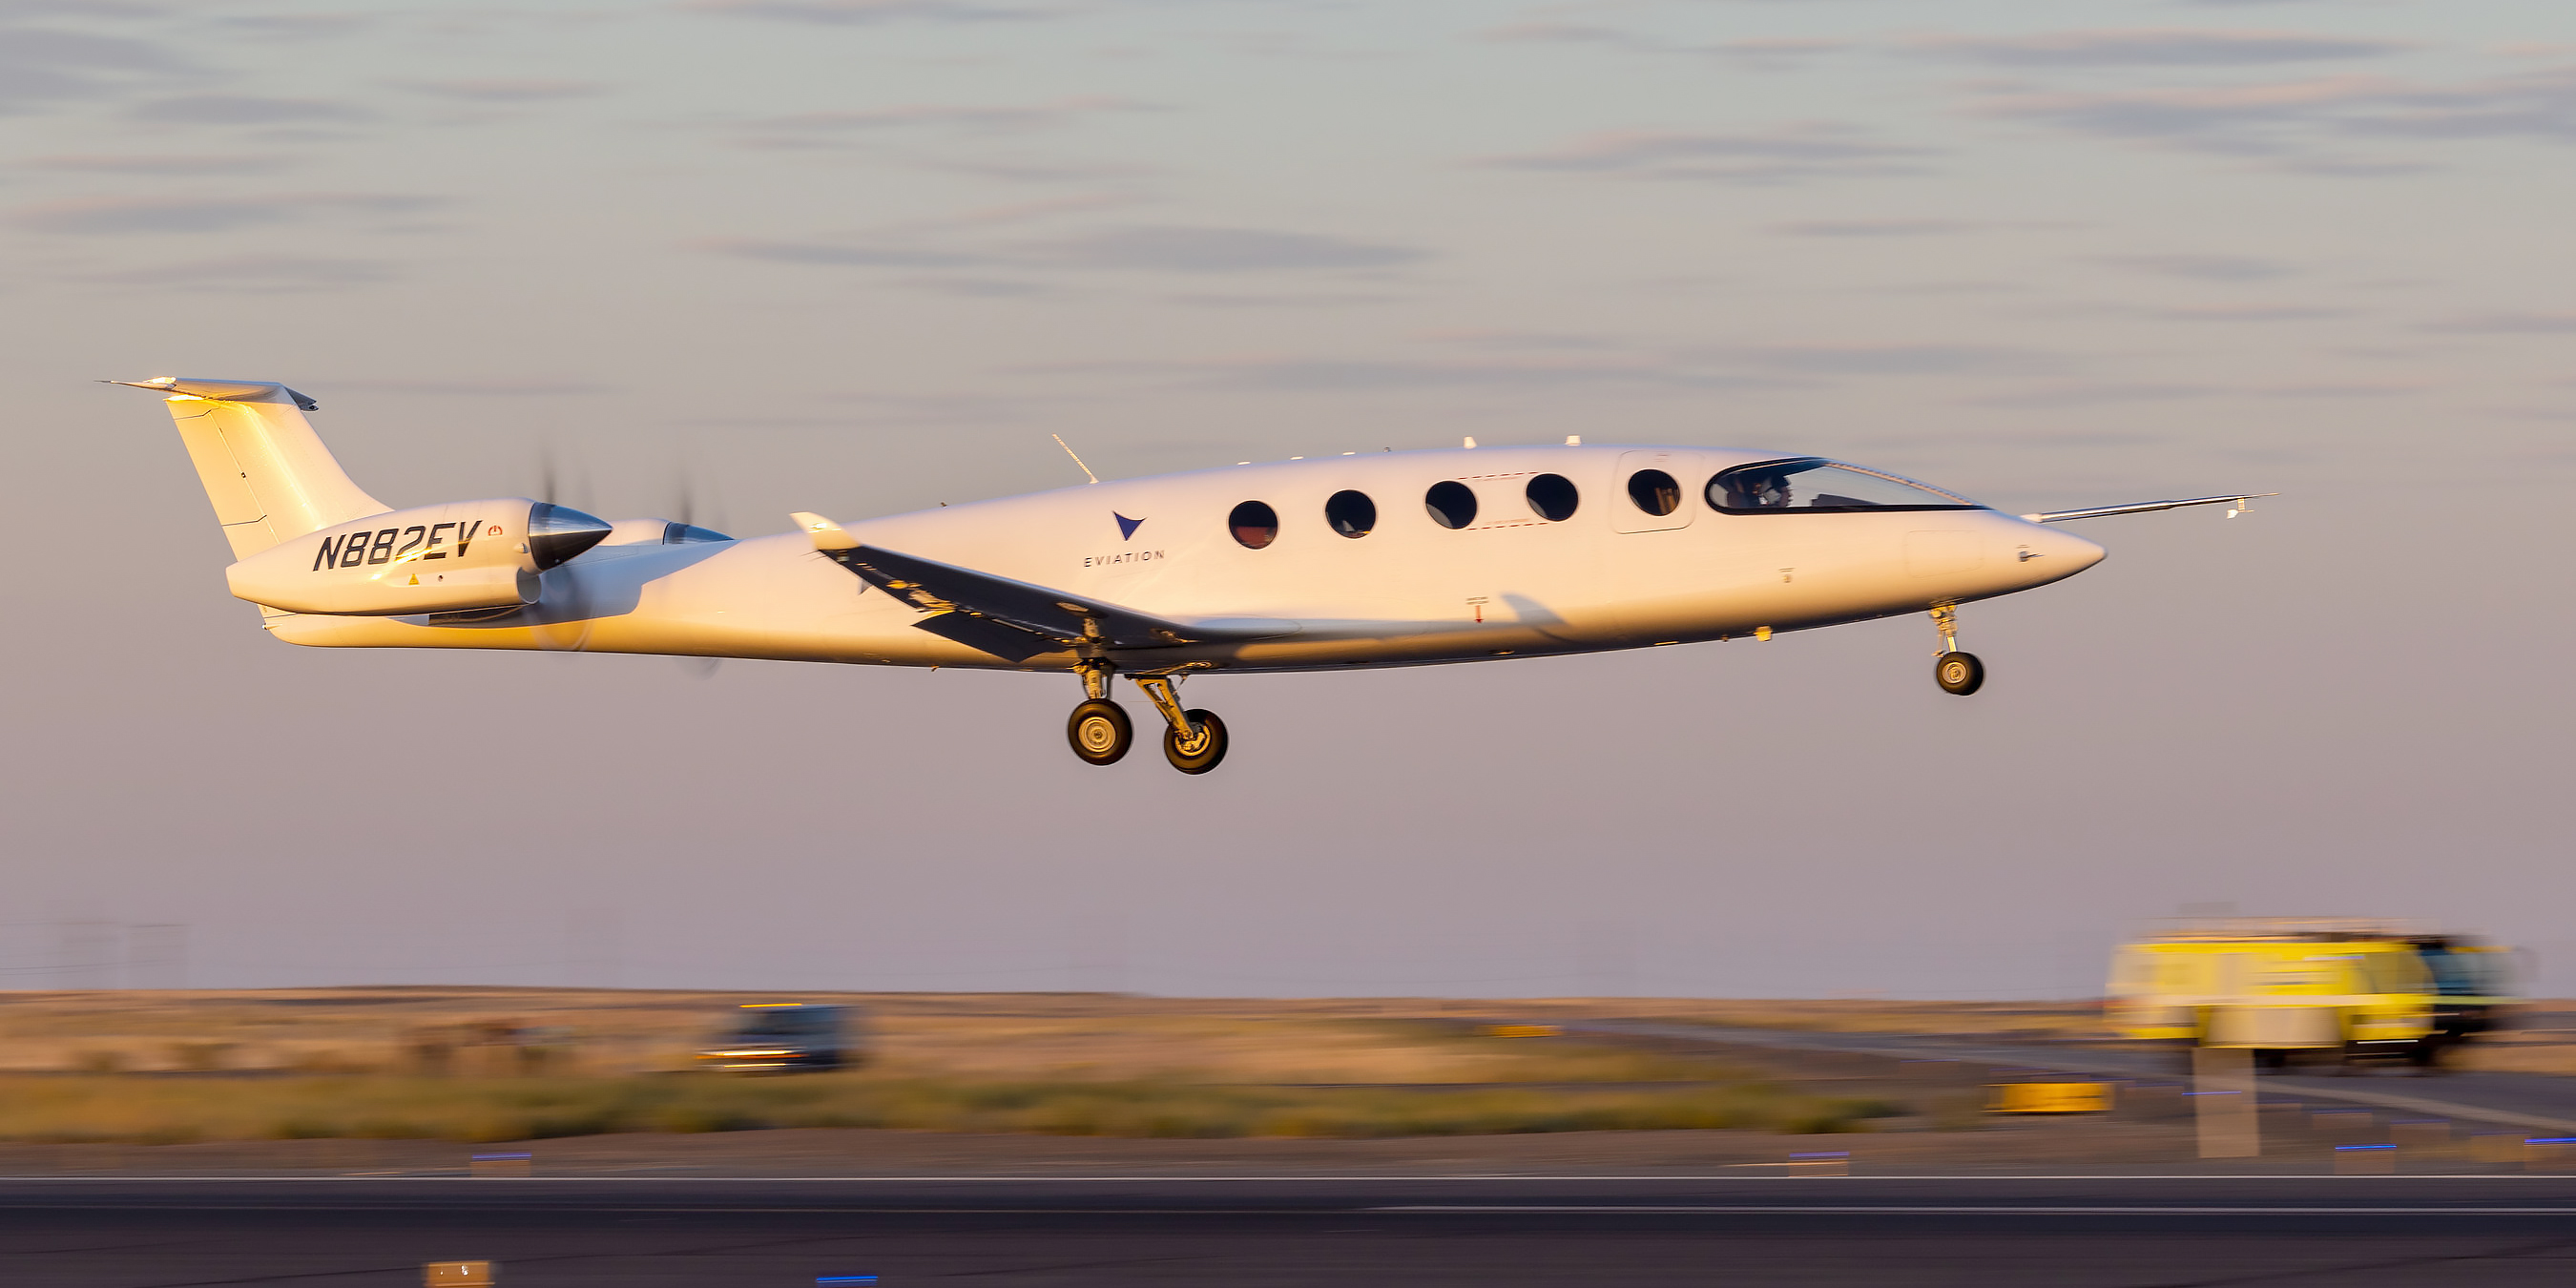 Eviation_s_Alice_Achieves_Milestone_with_Fi_rst_Flight_of_All_Electric_Aircraft-1